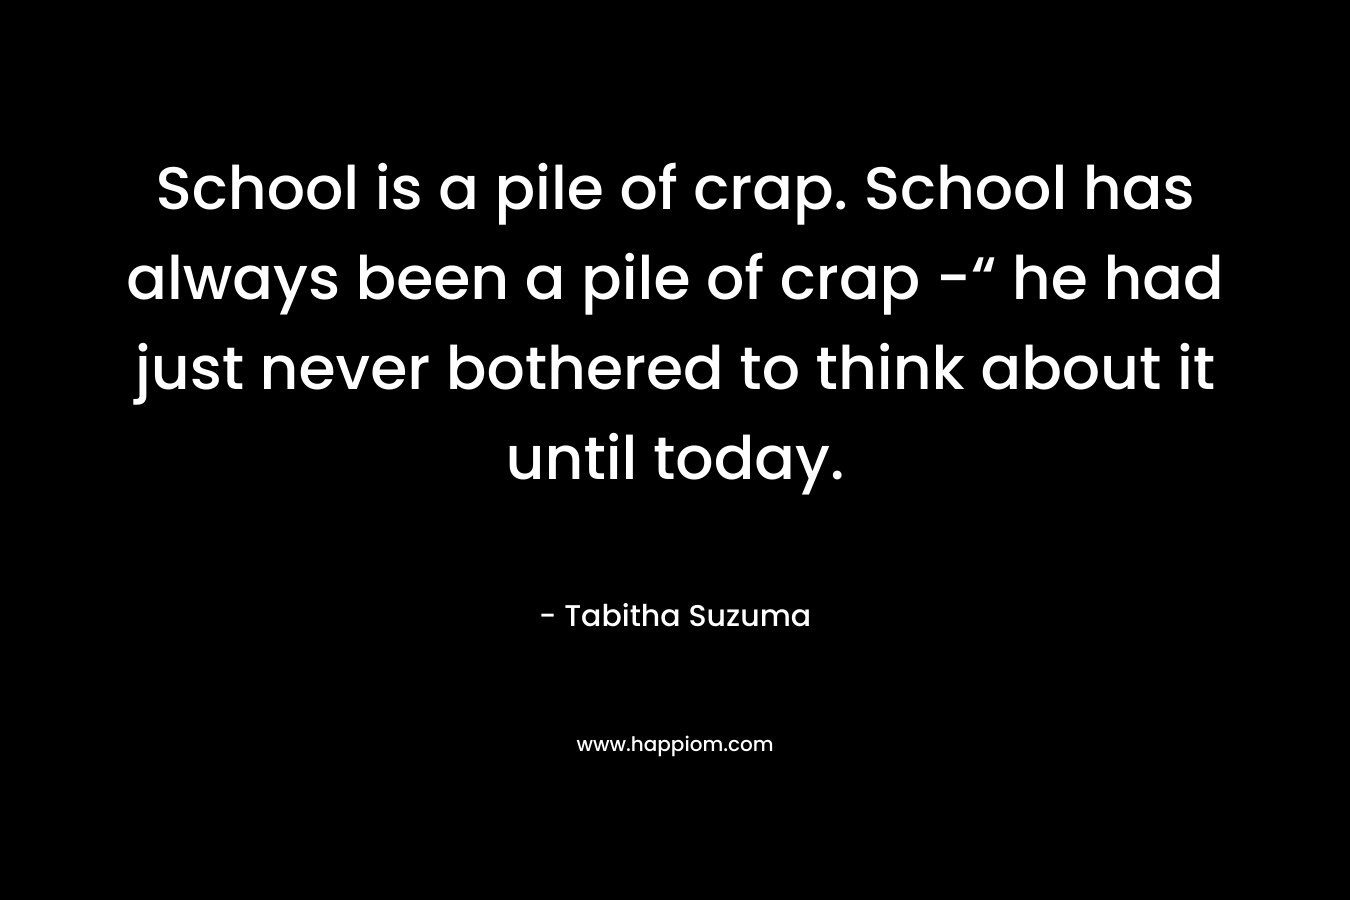 School is a pile of crap. School has always been a pile of crap -“ he had just never bothered to think about it until today. – Tabitha Suzuma